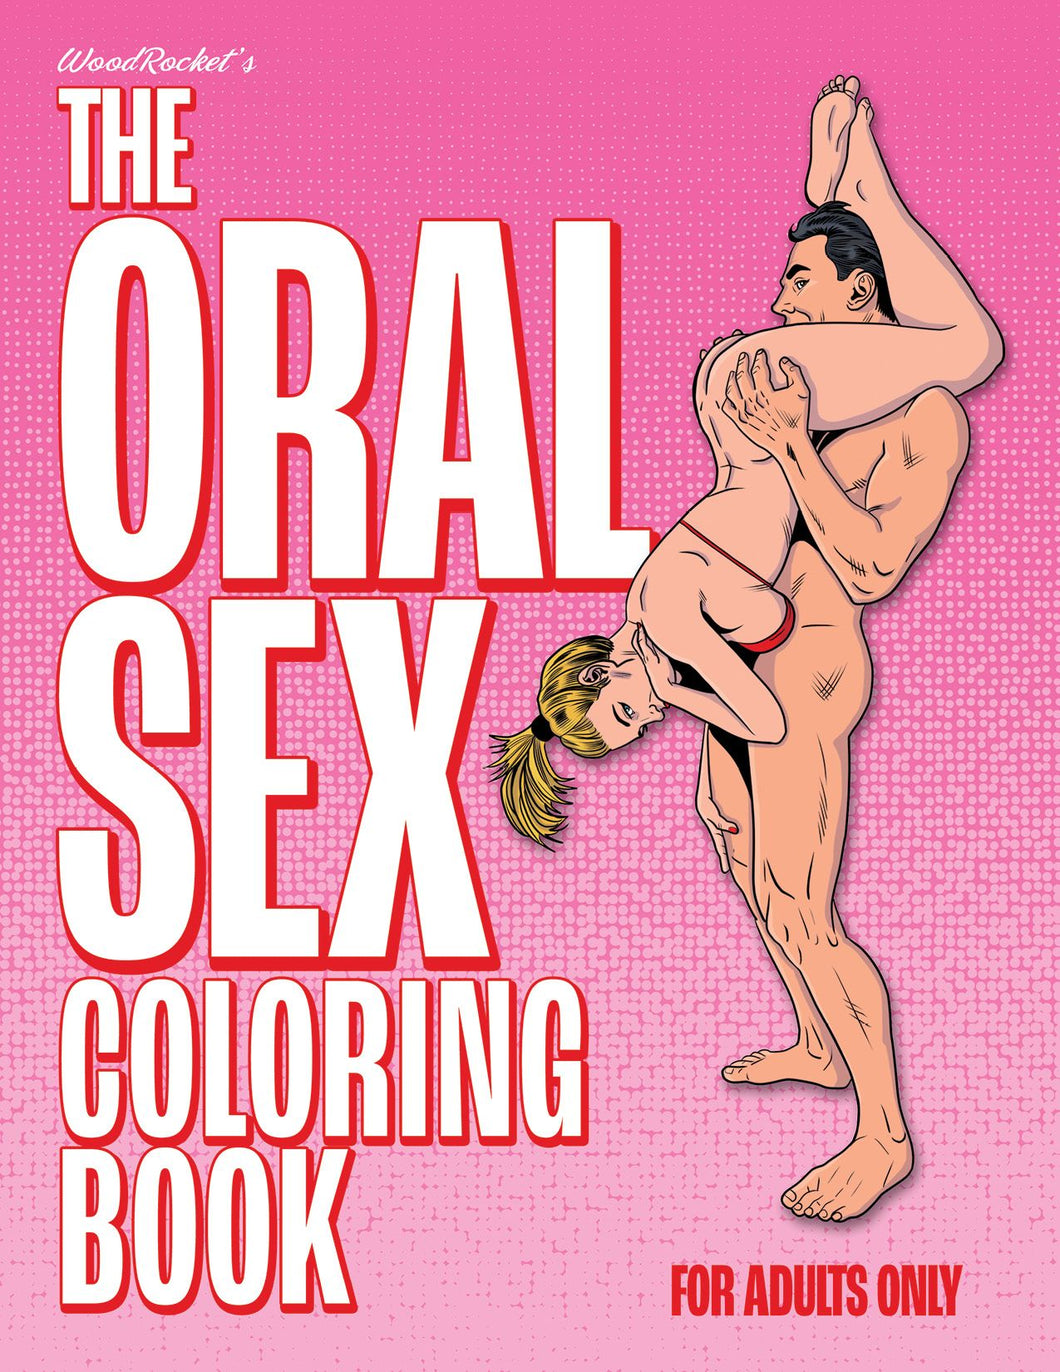 The Oral Sex Coloring Book by Wood Rocket